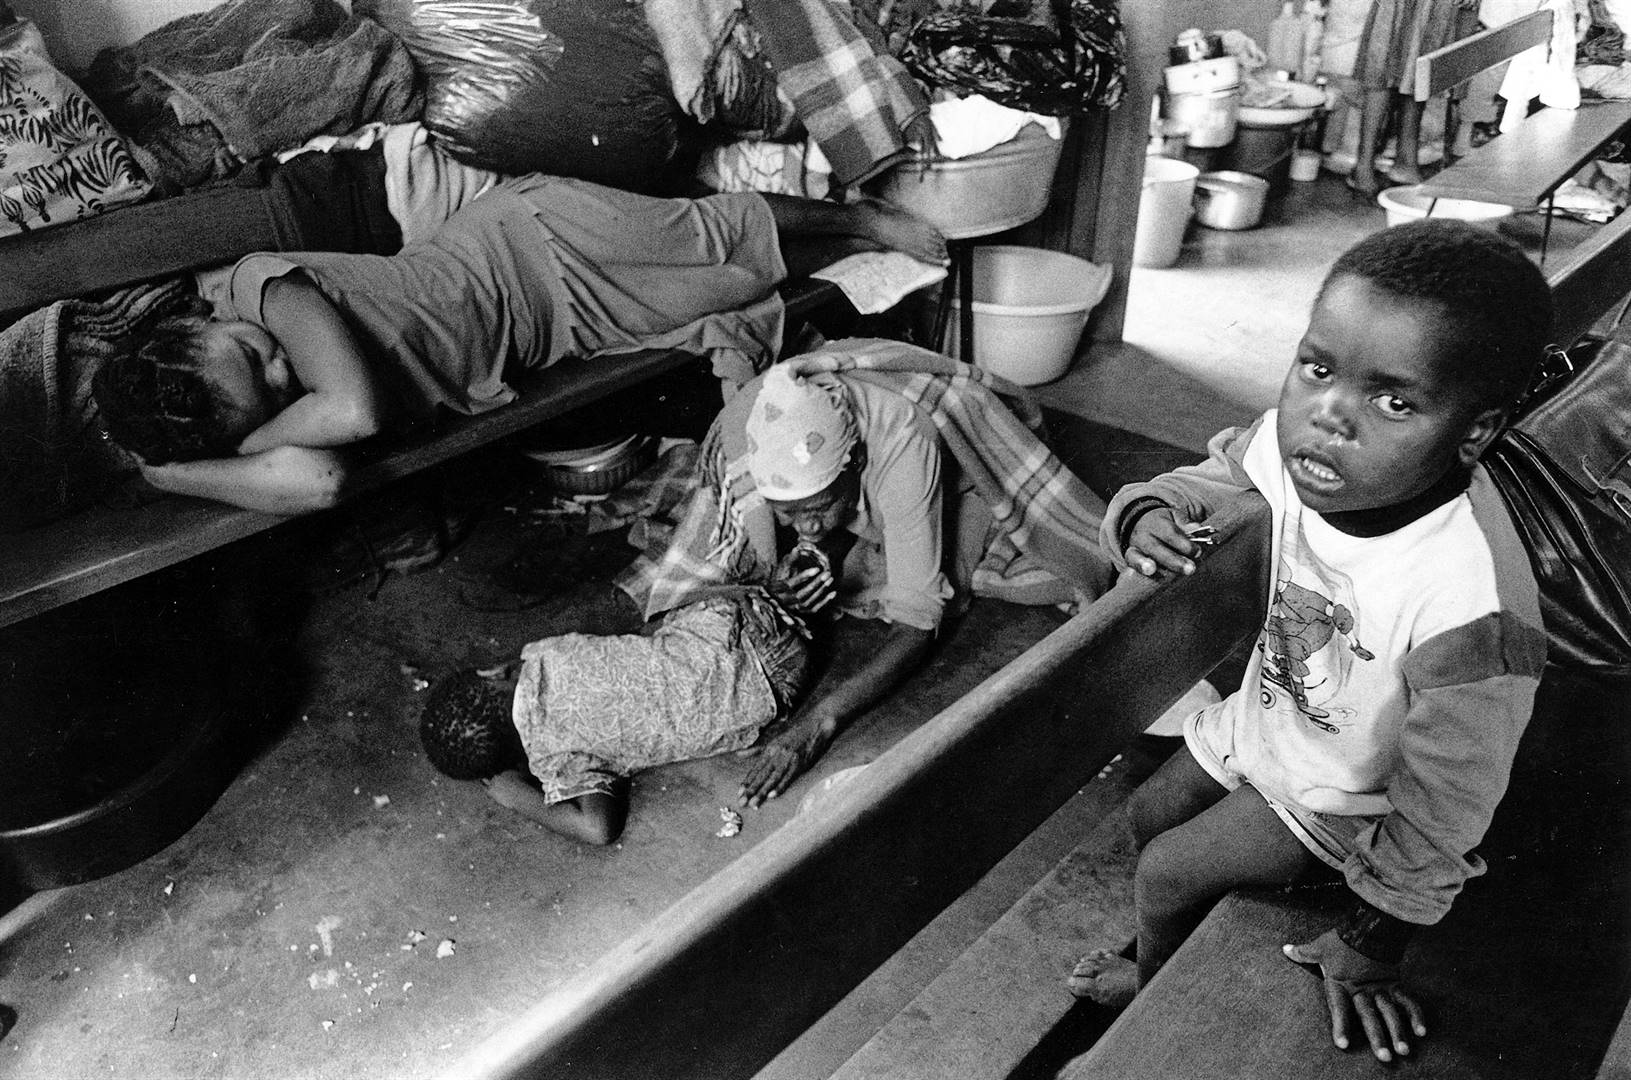 Refugees attempt to rest during the violence between the ANC and the IFP in what is now KwaZulu-Natal in April in 1990.Photo: Gallo images / rapport archives